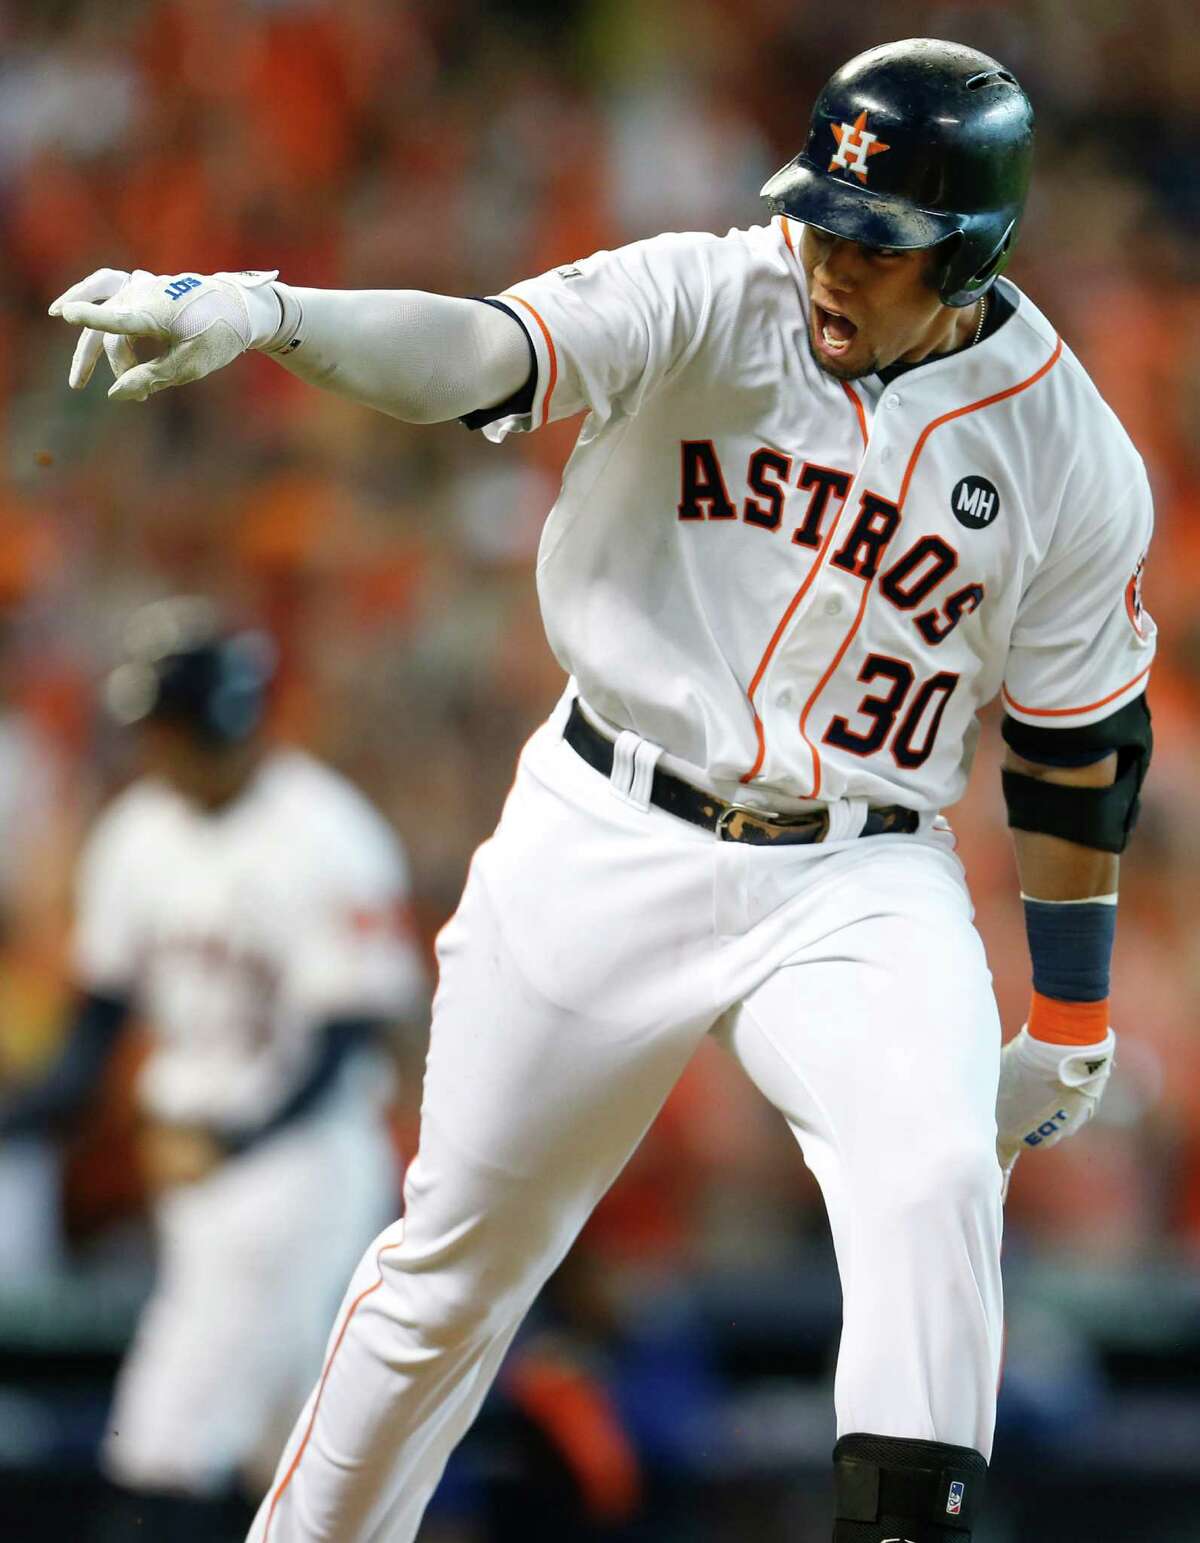 Houston Astros center fielder Carlos Gomez (30) points to the dugout after hitting an RBI single, scoring George Springer, off Kansas City Royals starting pitcher Edinson Volquez during the sixth inning of Game 3 of the American League Division Series at Minute Maid Park on Sunday, Oct. 11, 2015, in Houston. ( Karen Warren / Houston Chronicle )